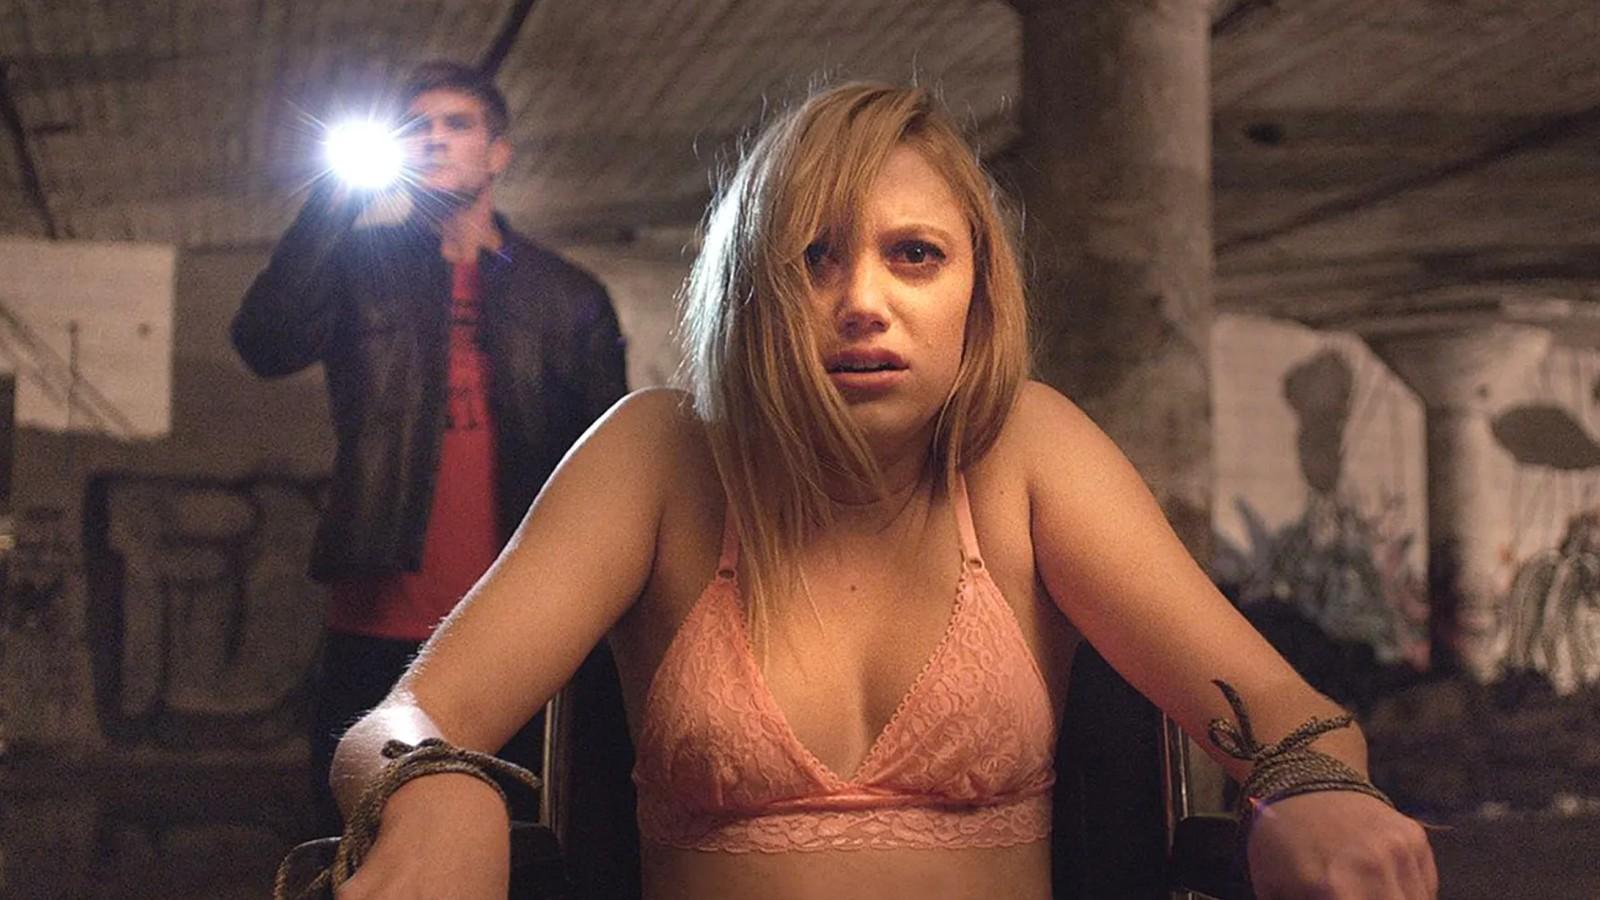 Maika Monroe tied to a chair in It Follows.